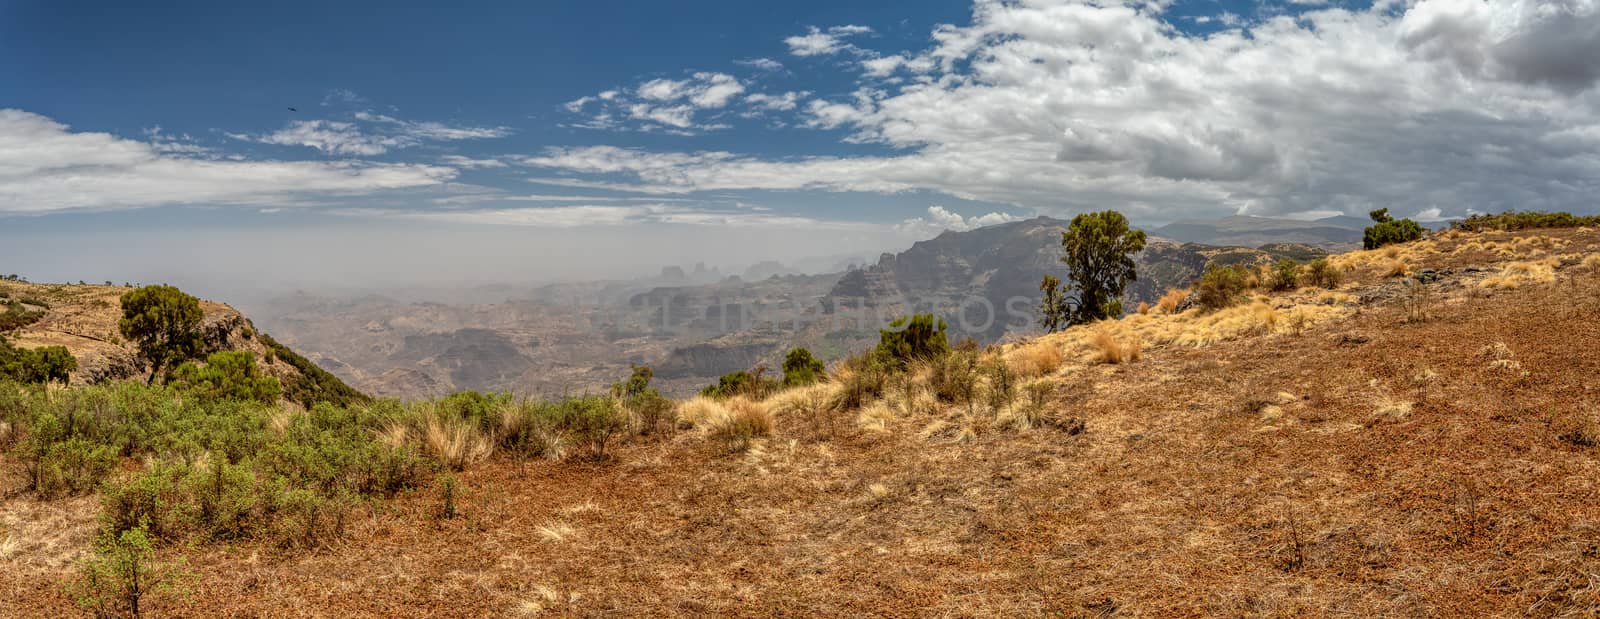 Semien or Simien Mountains, Ethiopia, Africa by artush